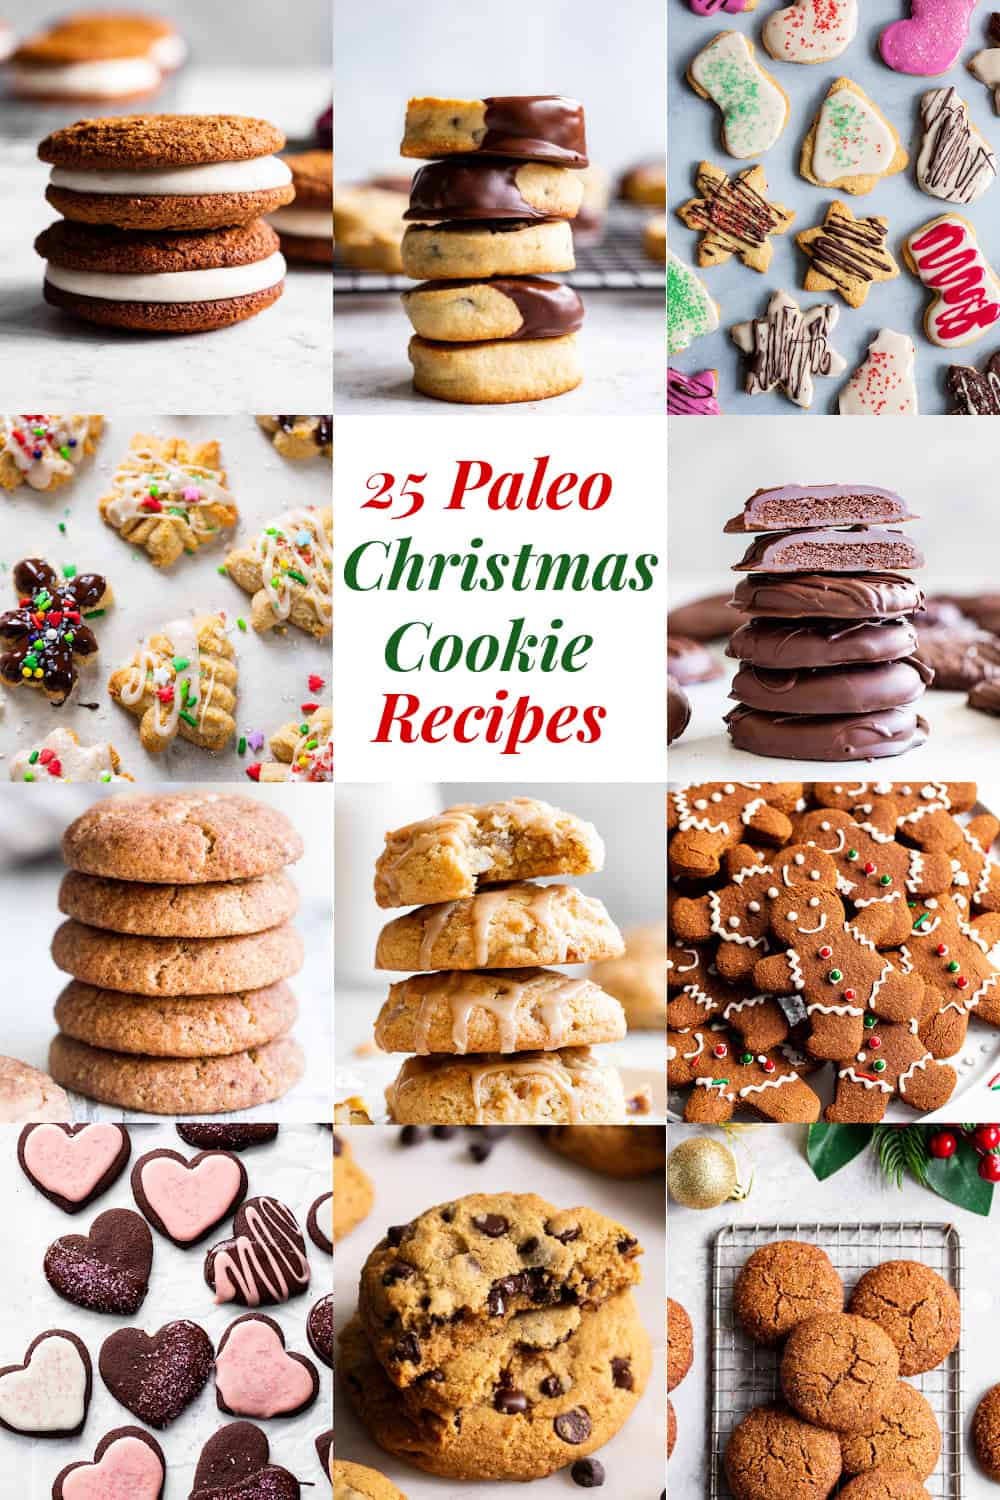 These 25 Paleo Christmas Cookies will make your holiday season a whole lot merrier!  From  snickerdoodles, to thin mints, to classic cutout sugar cookies and more, there's something for everyone in this roundup.  All cookies are gluten-free, grain free, dairy-free and soy free with many vegan options as well. #paleo #glutenfree #paleobaking #christmascookies #christmas 